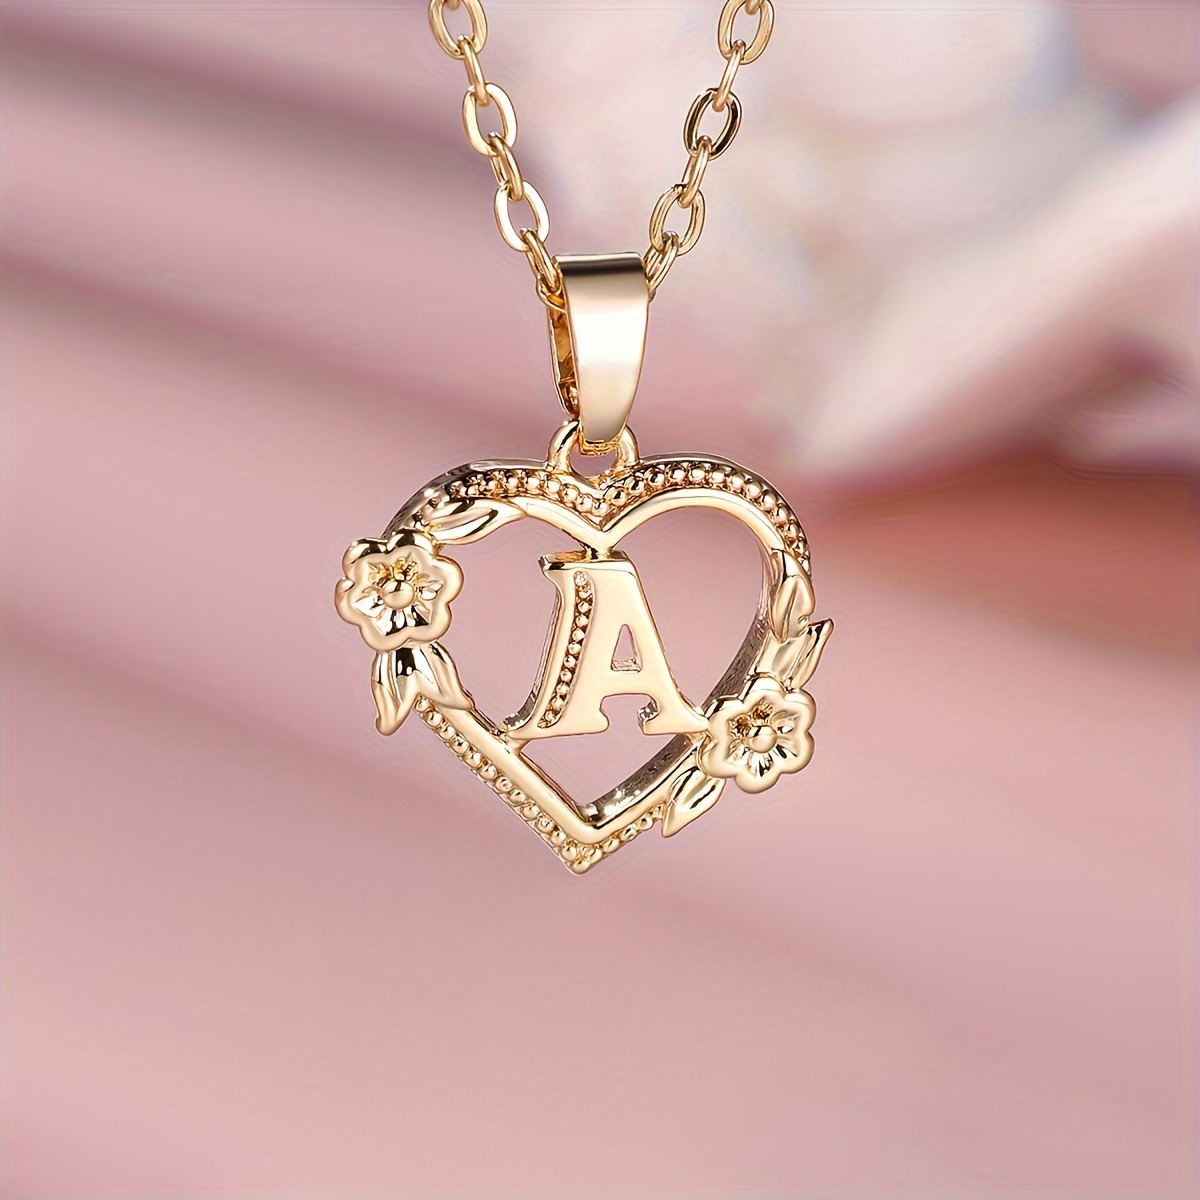 Buy Gold Love Heart 26 English Letter Initial Charms for Bracelets